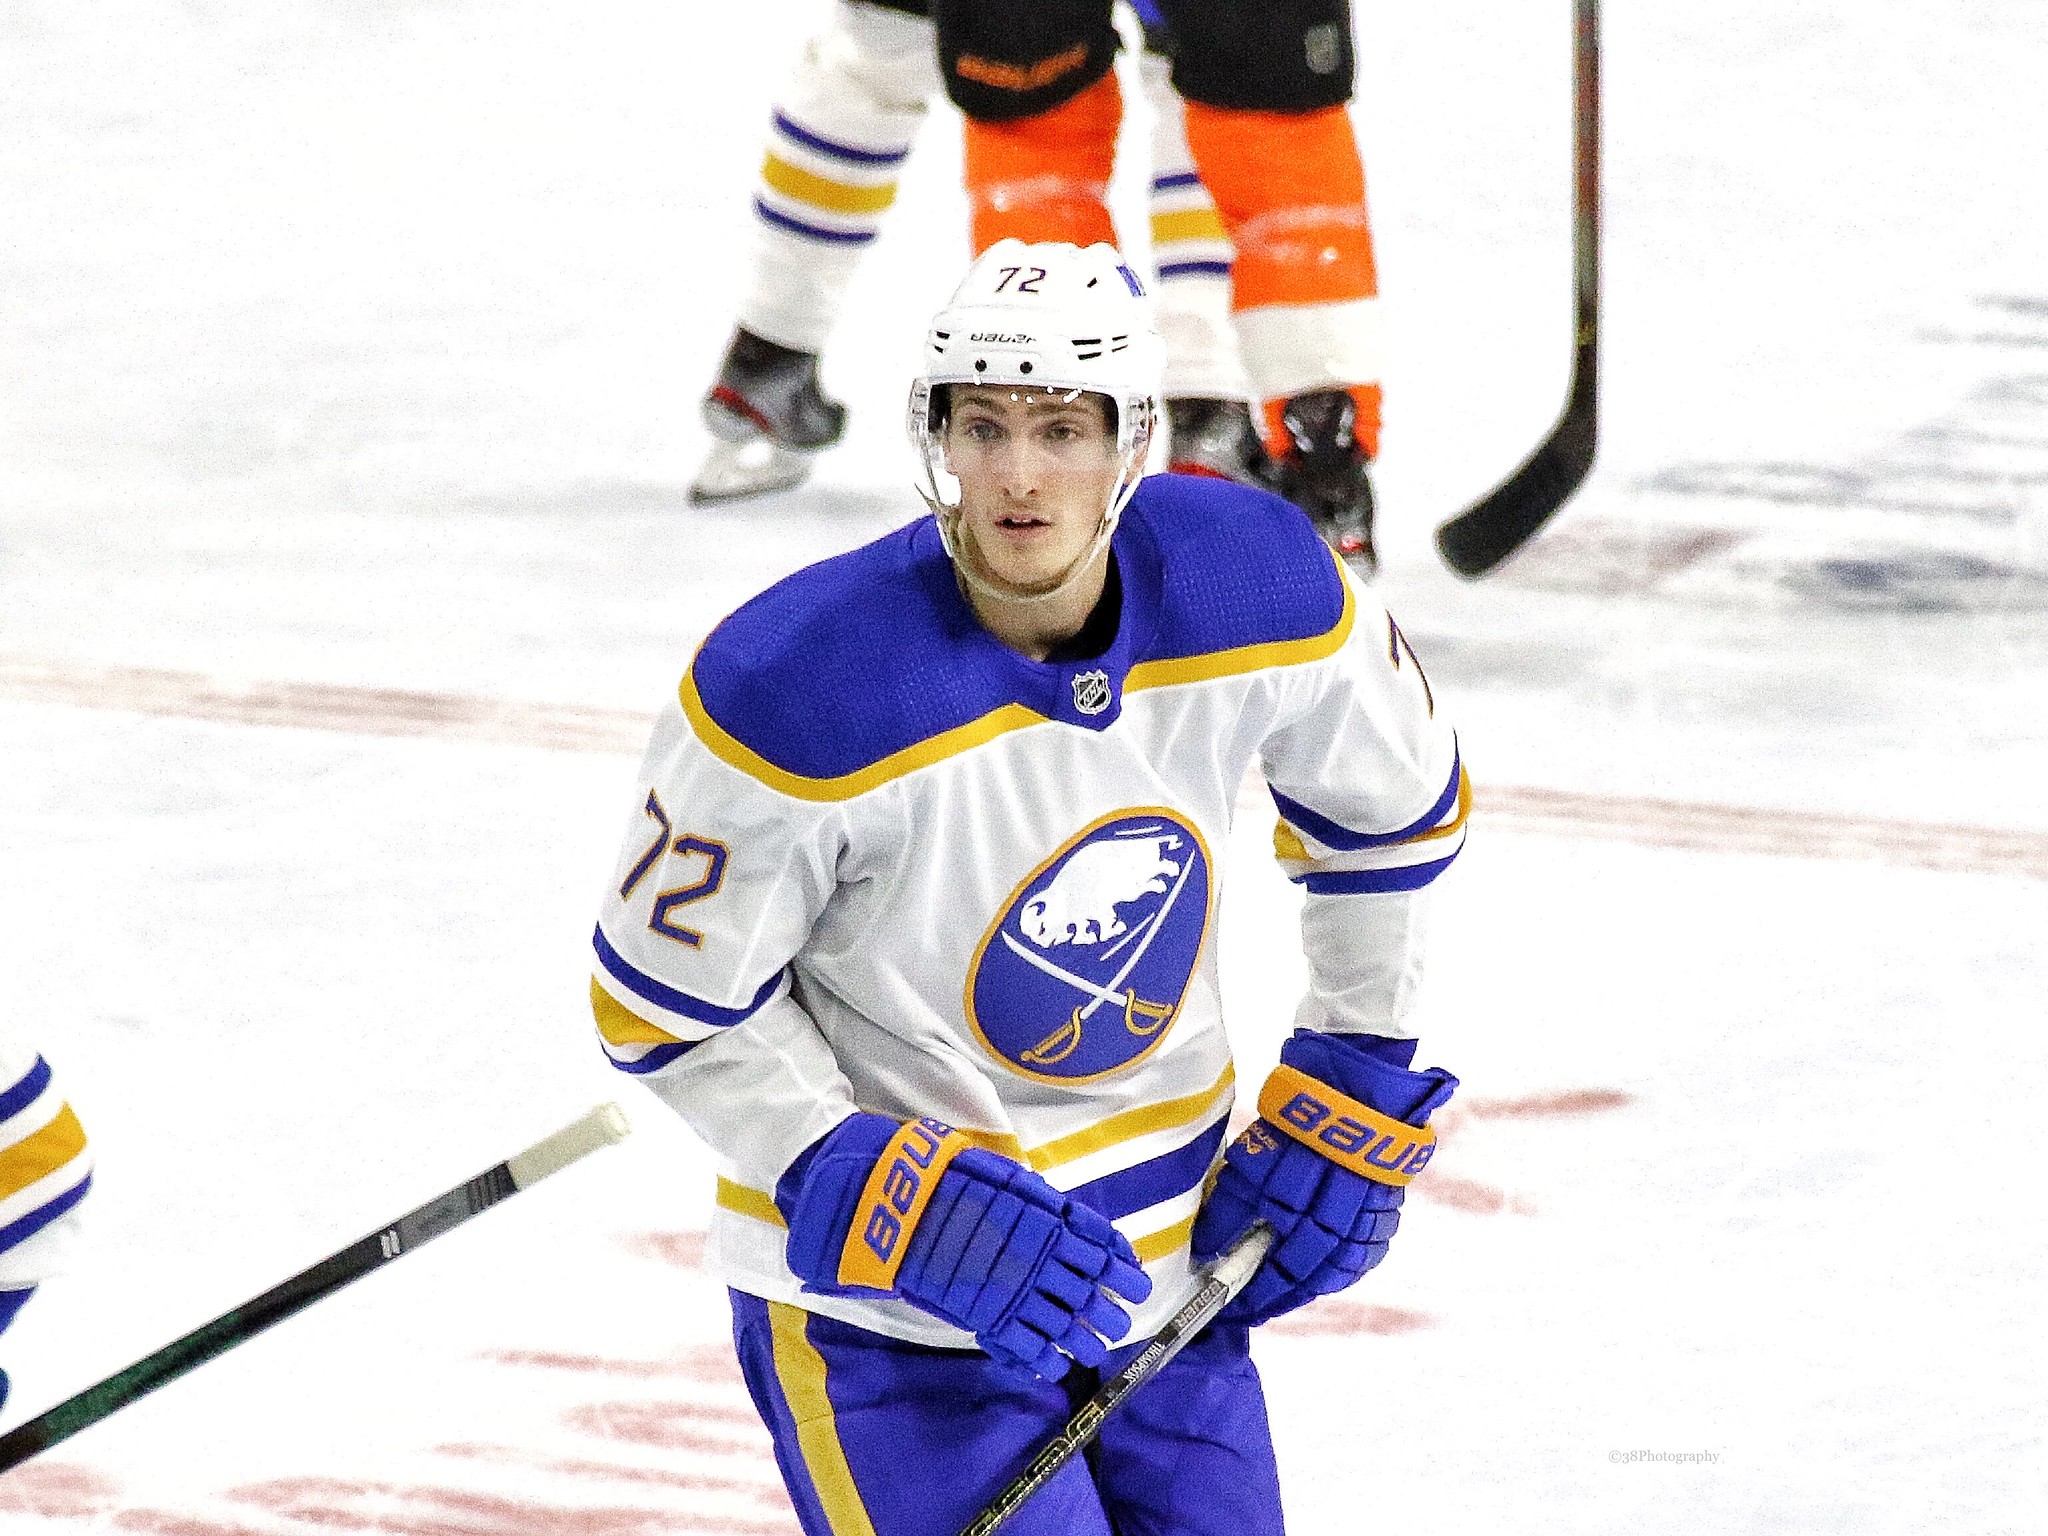 Buffalo Sabres Star Tage Thompson Now Has a Mullet [PHOTOS]